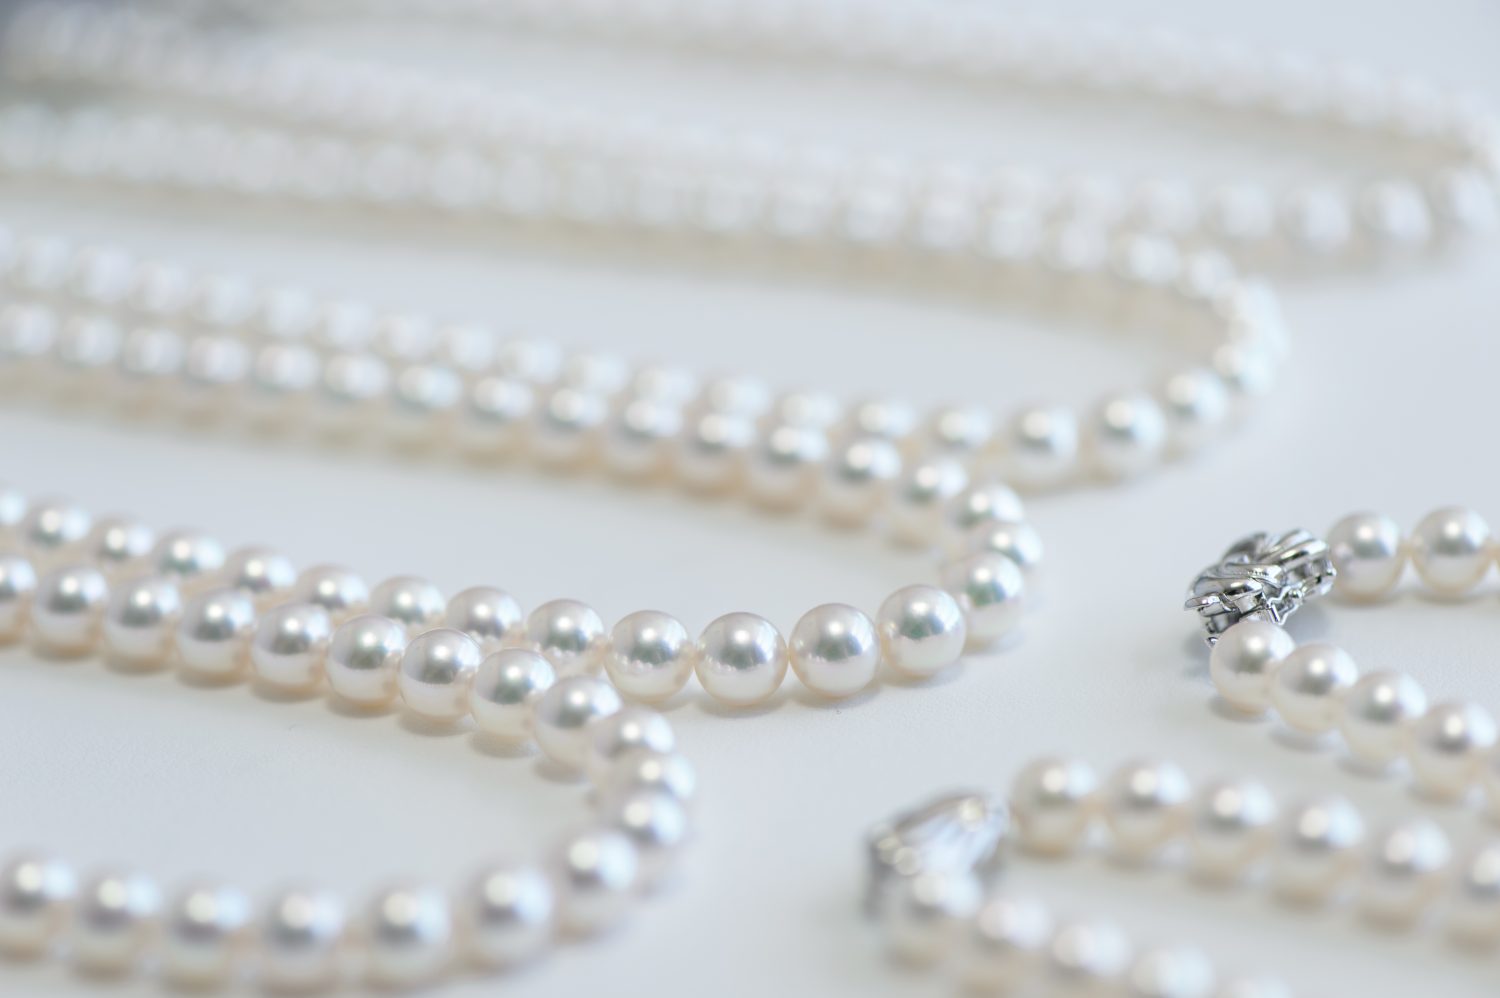 The beautiful Japanese pearls straight from the source-Ise Shima